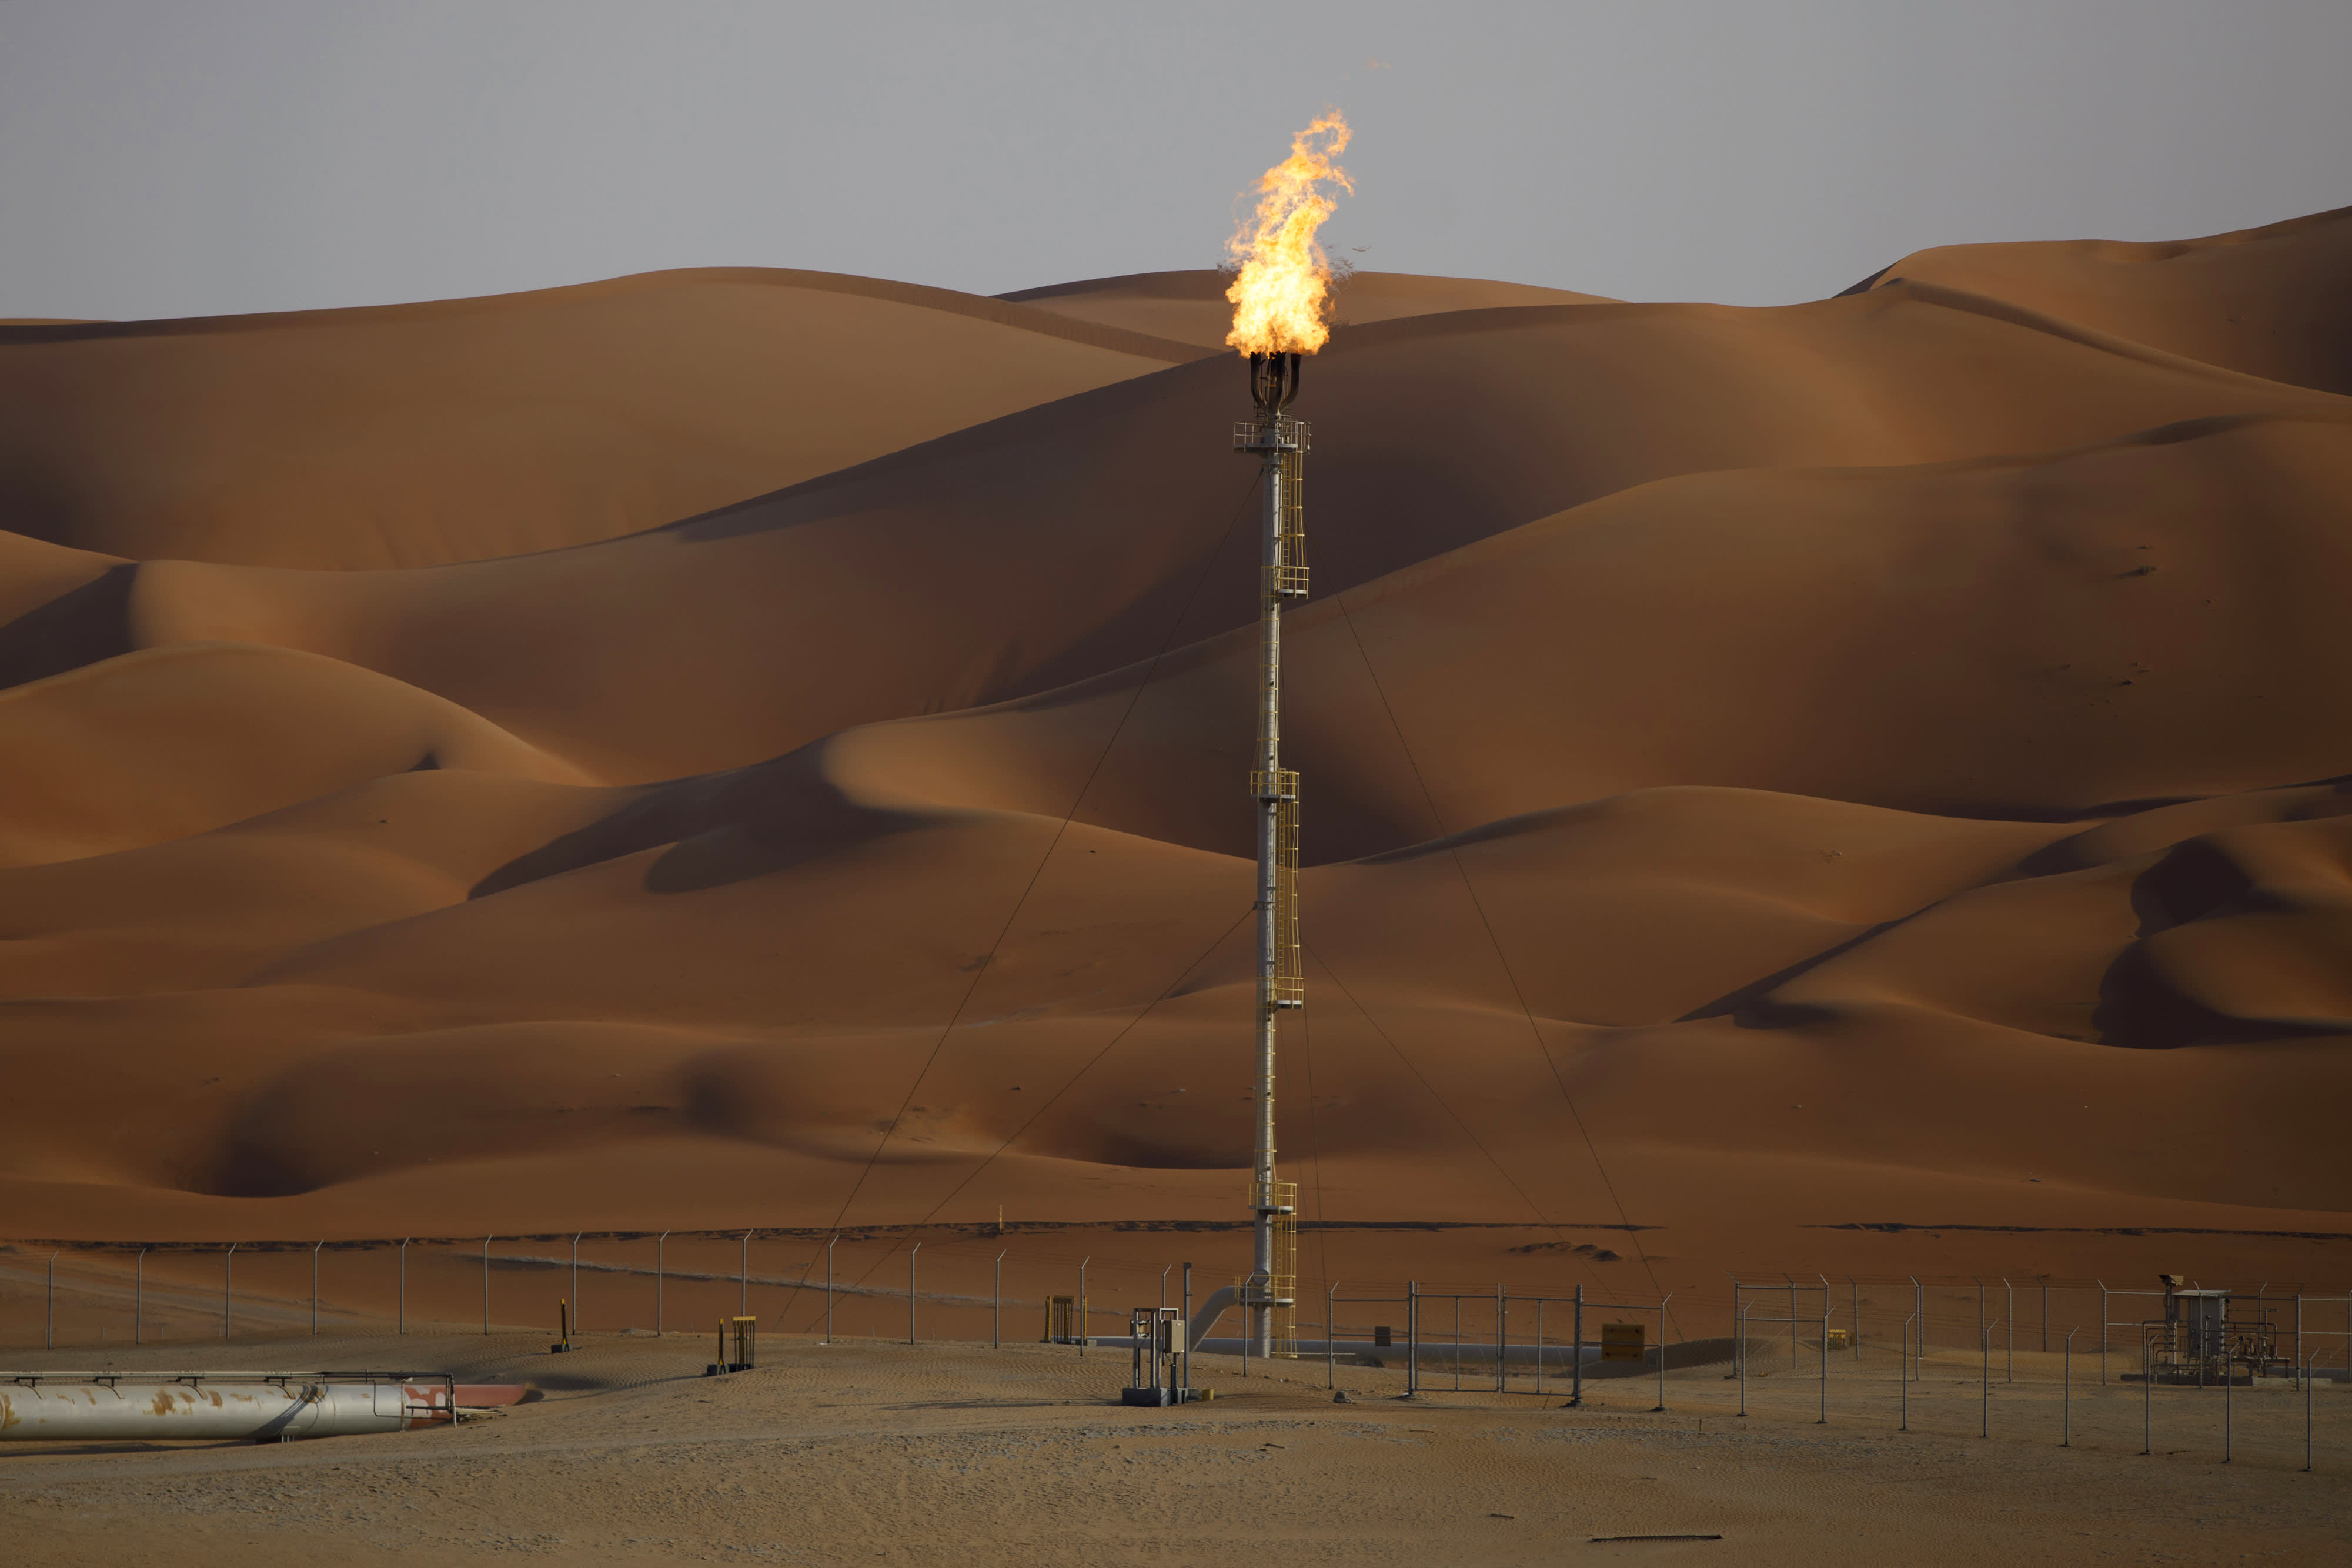 Oil rises for fear of increased tensions in the Middle East